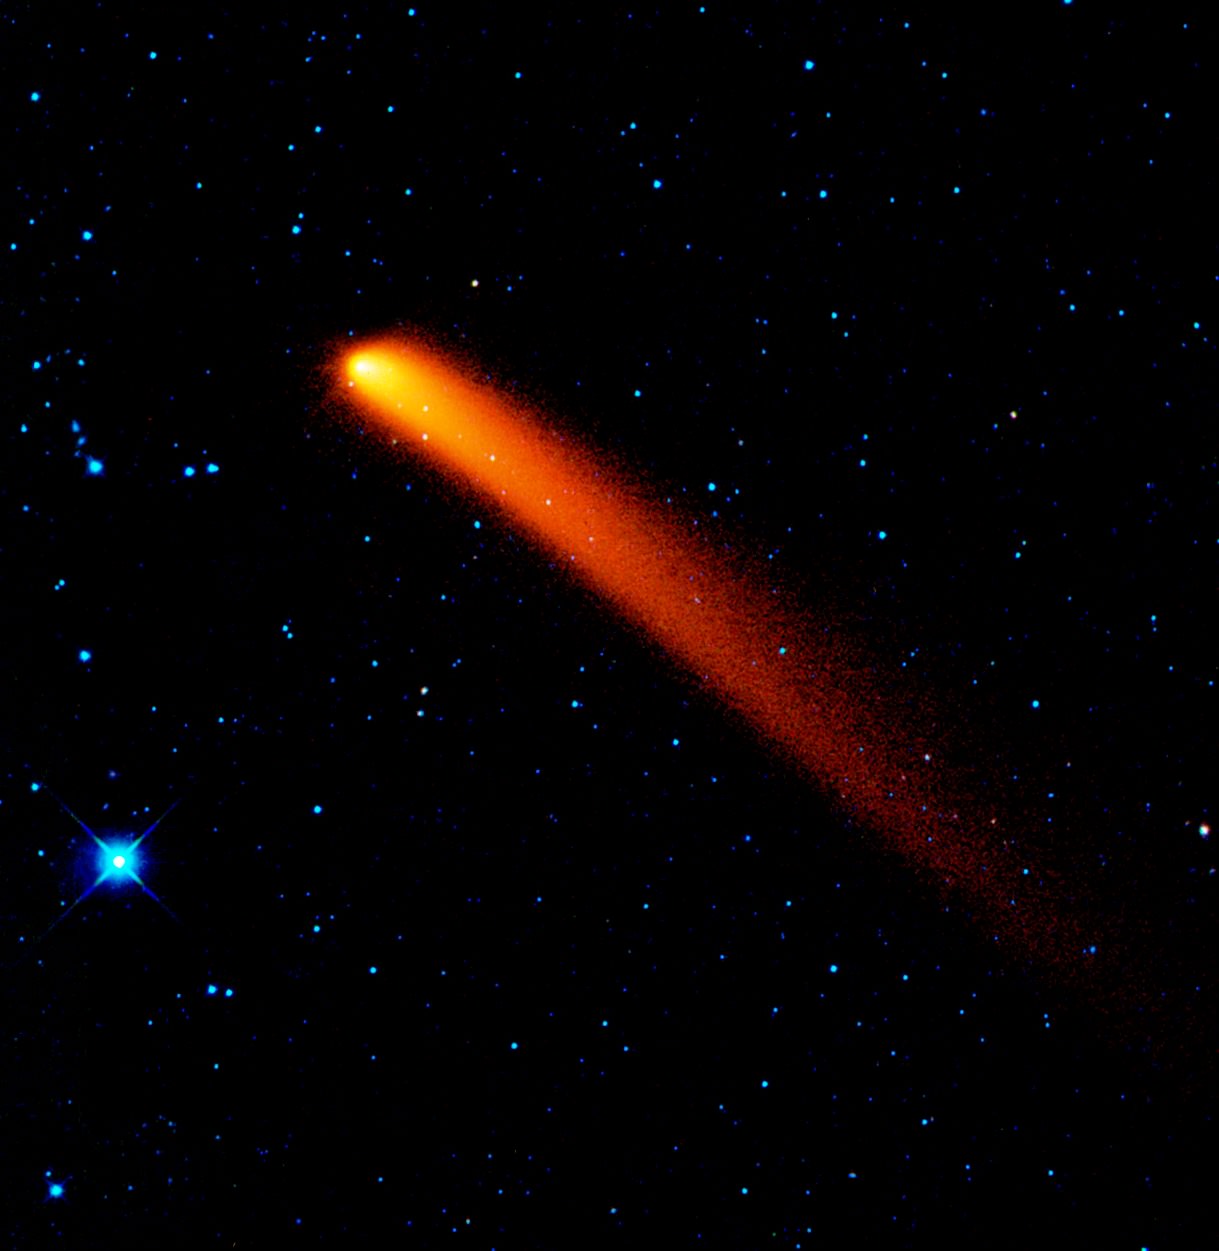 Comet Siding Spring (C/2007 Q3) as imaged in the infrared by the WISE space telescope. The image was taken January 10, 2010 when the comet was 2.5AU from the Sun. Credit: NASA/JPL-Caltech/UCLA